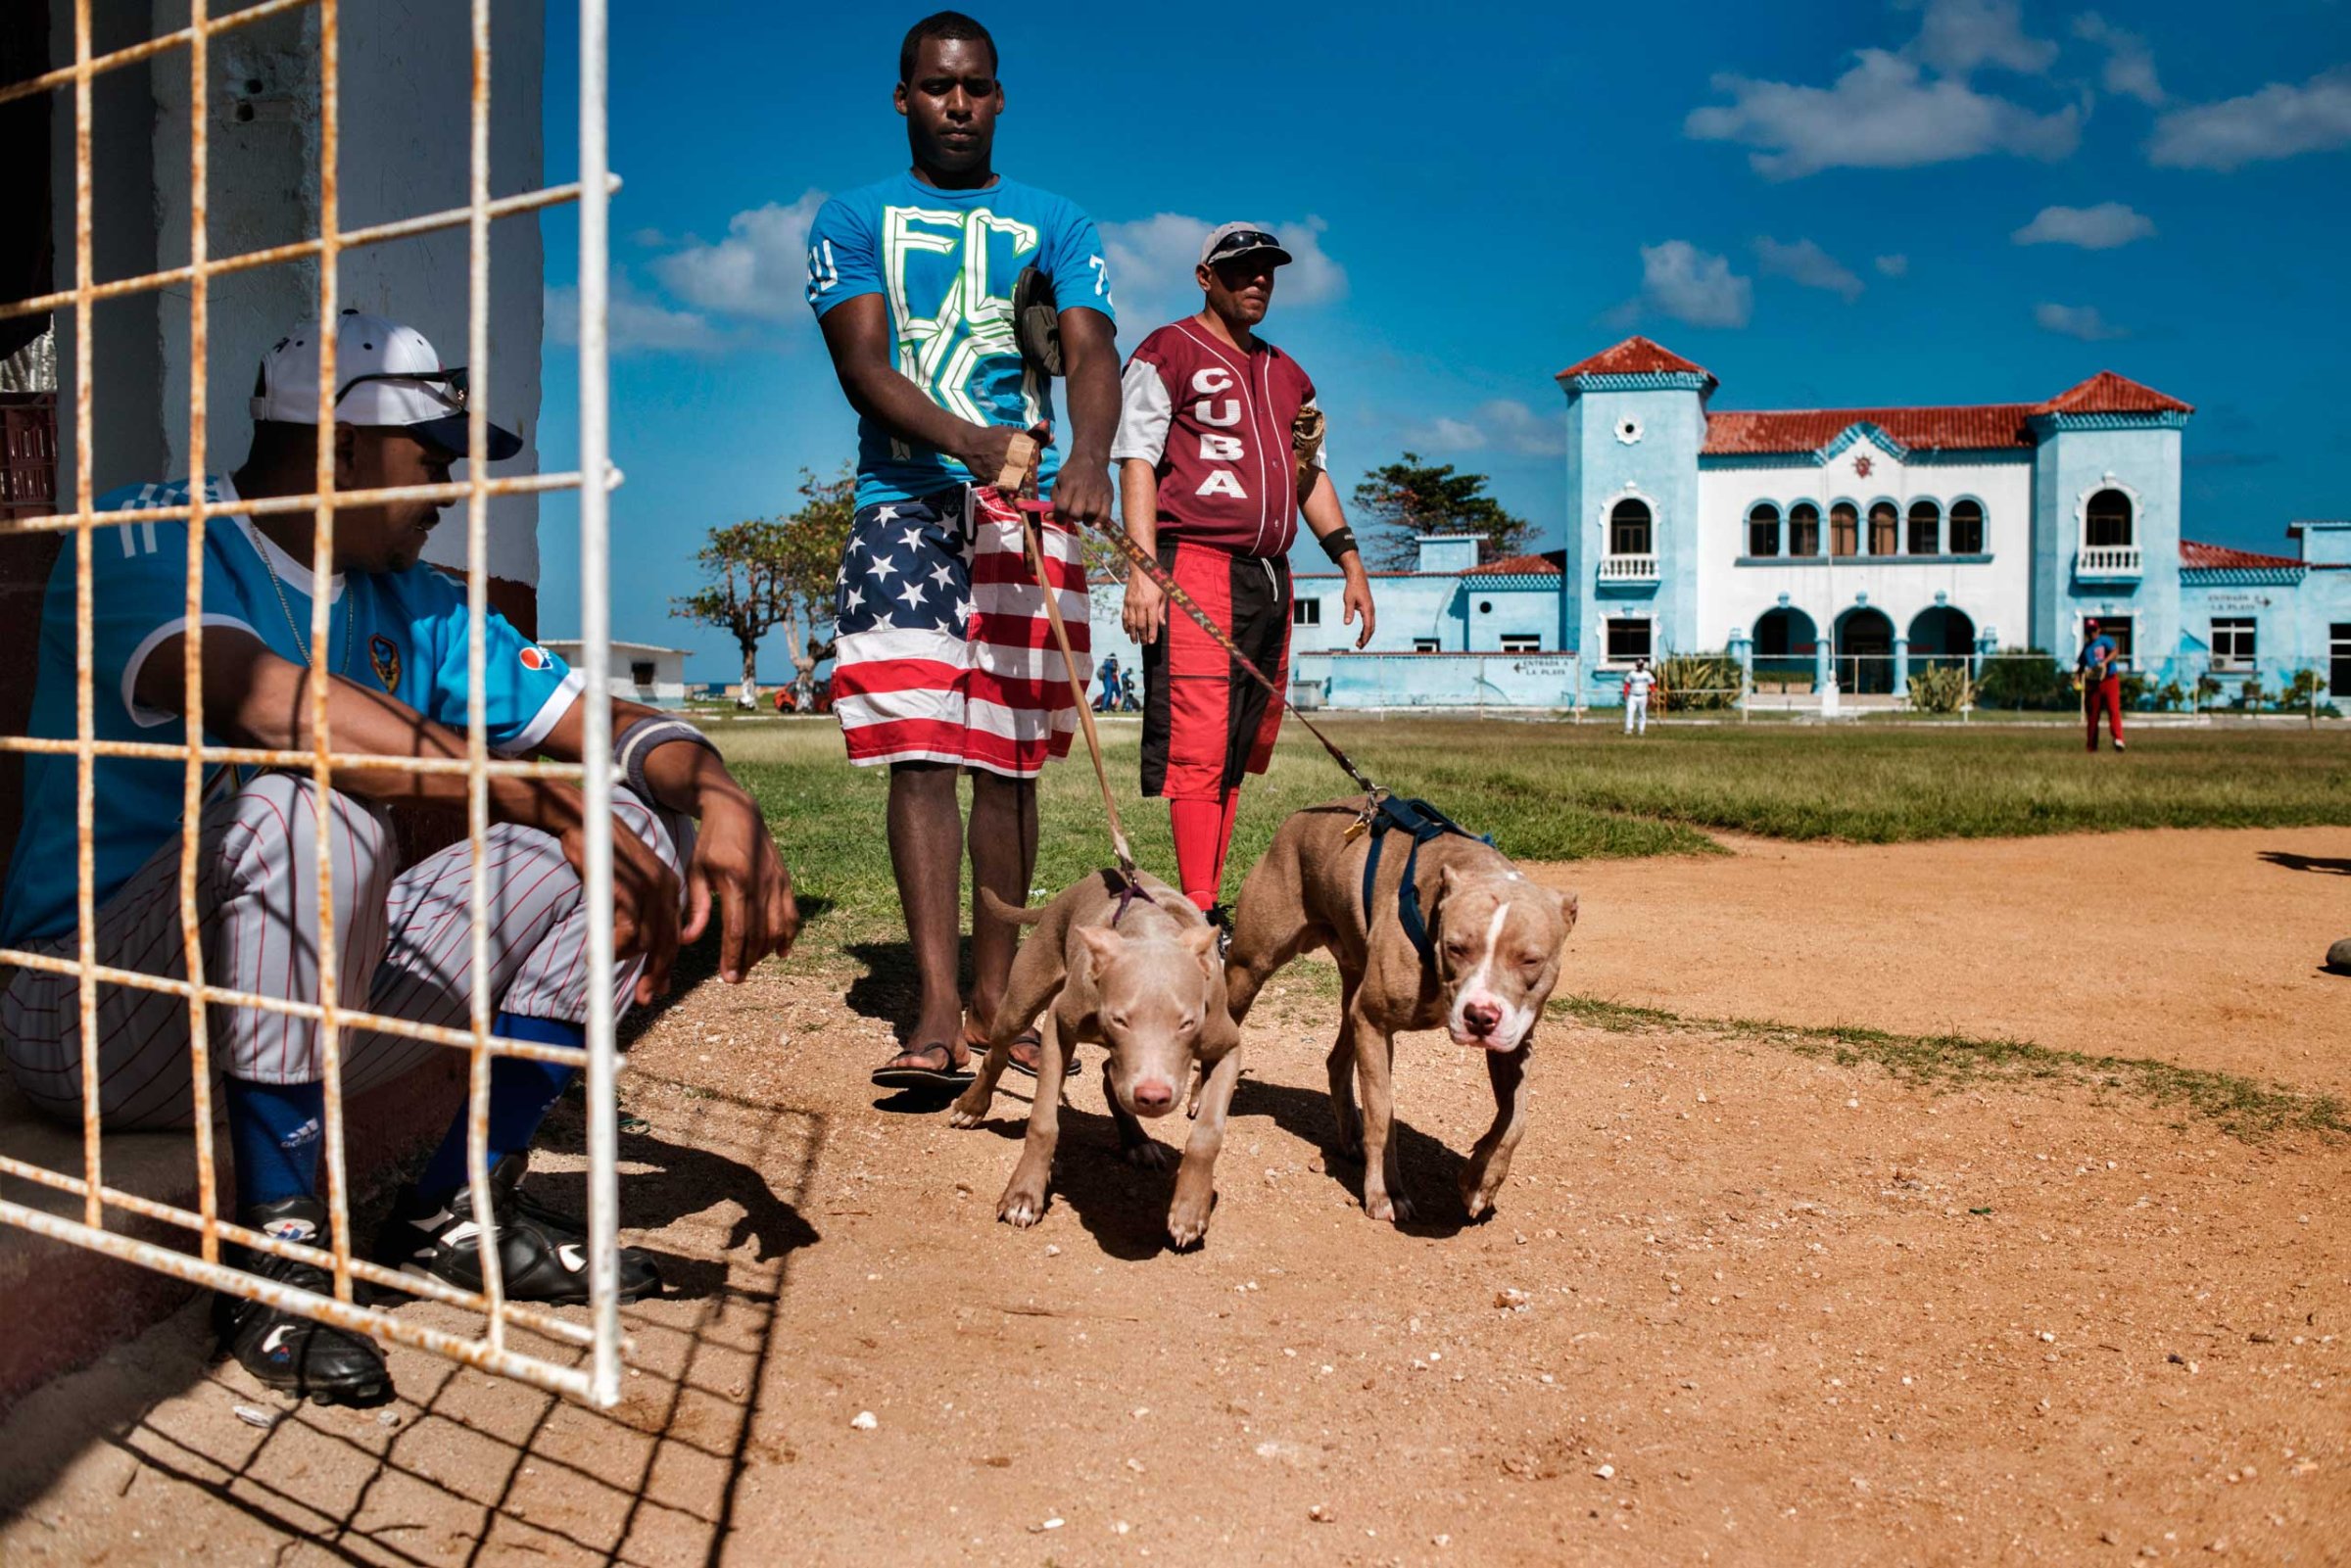 Young man wears shorts with the colors of the U.S. flag in Jaimanitas , Cuba, Jan. 2015.